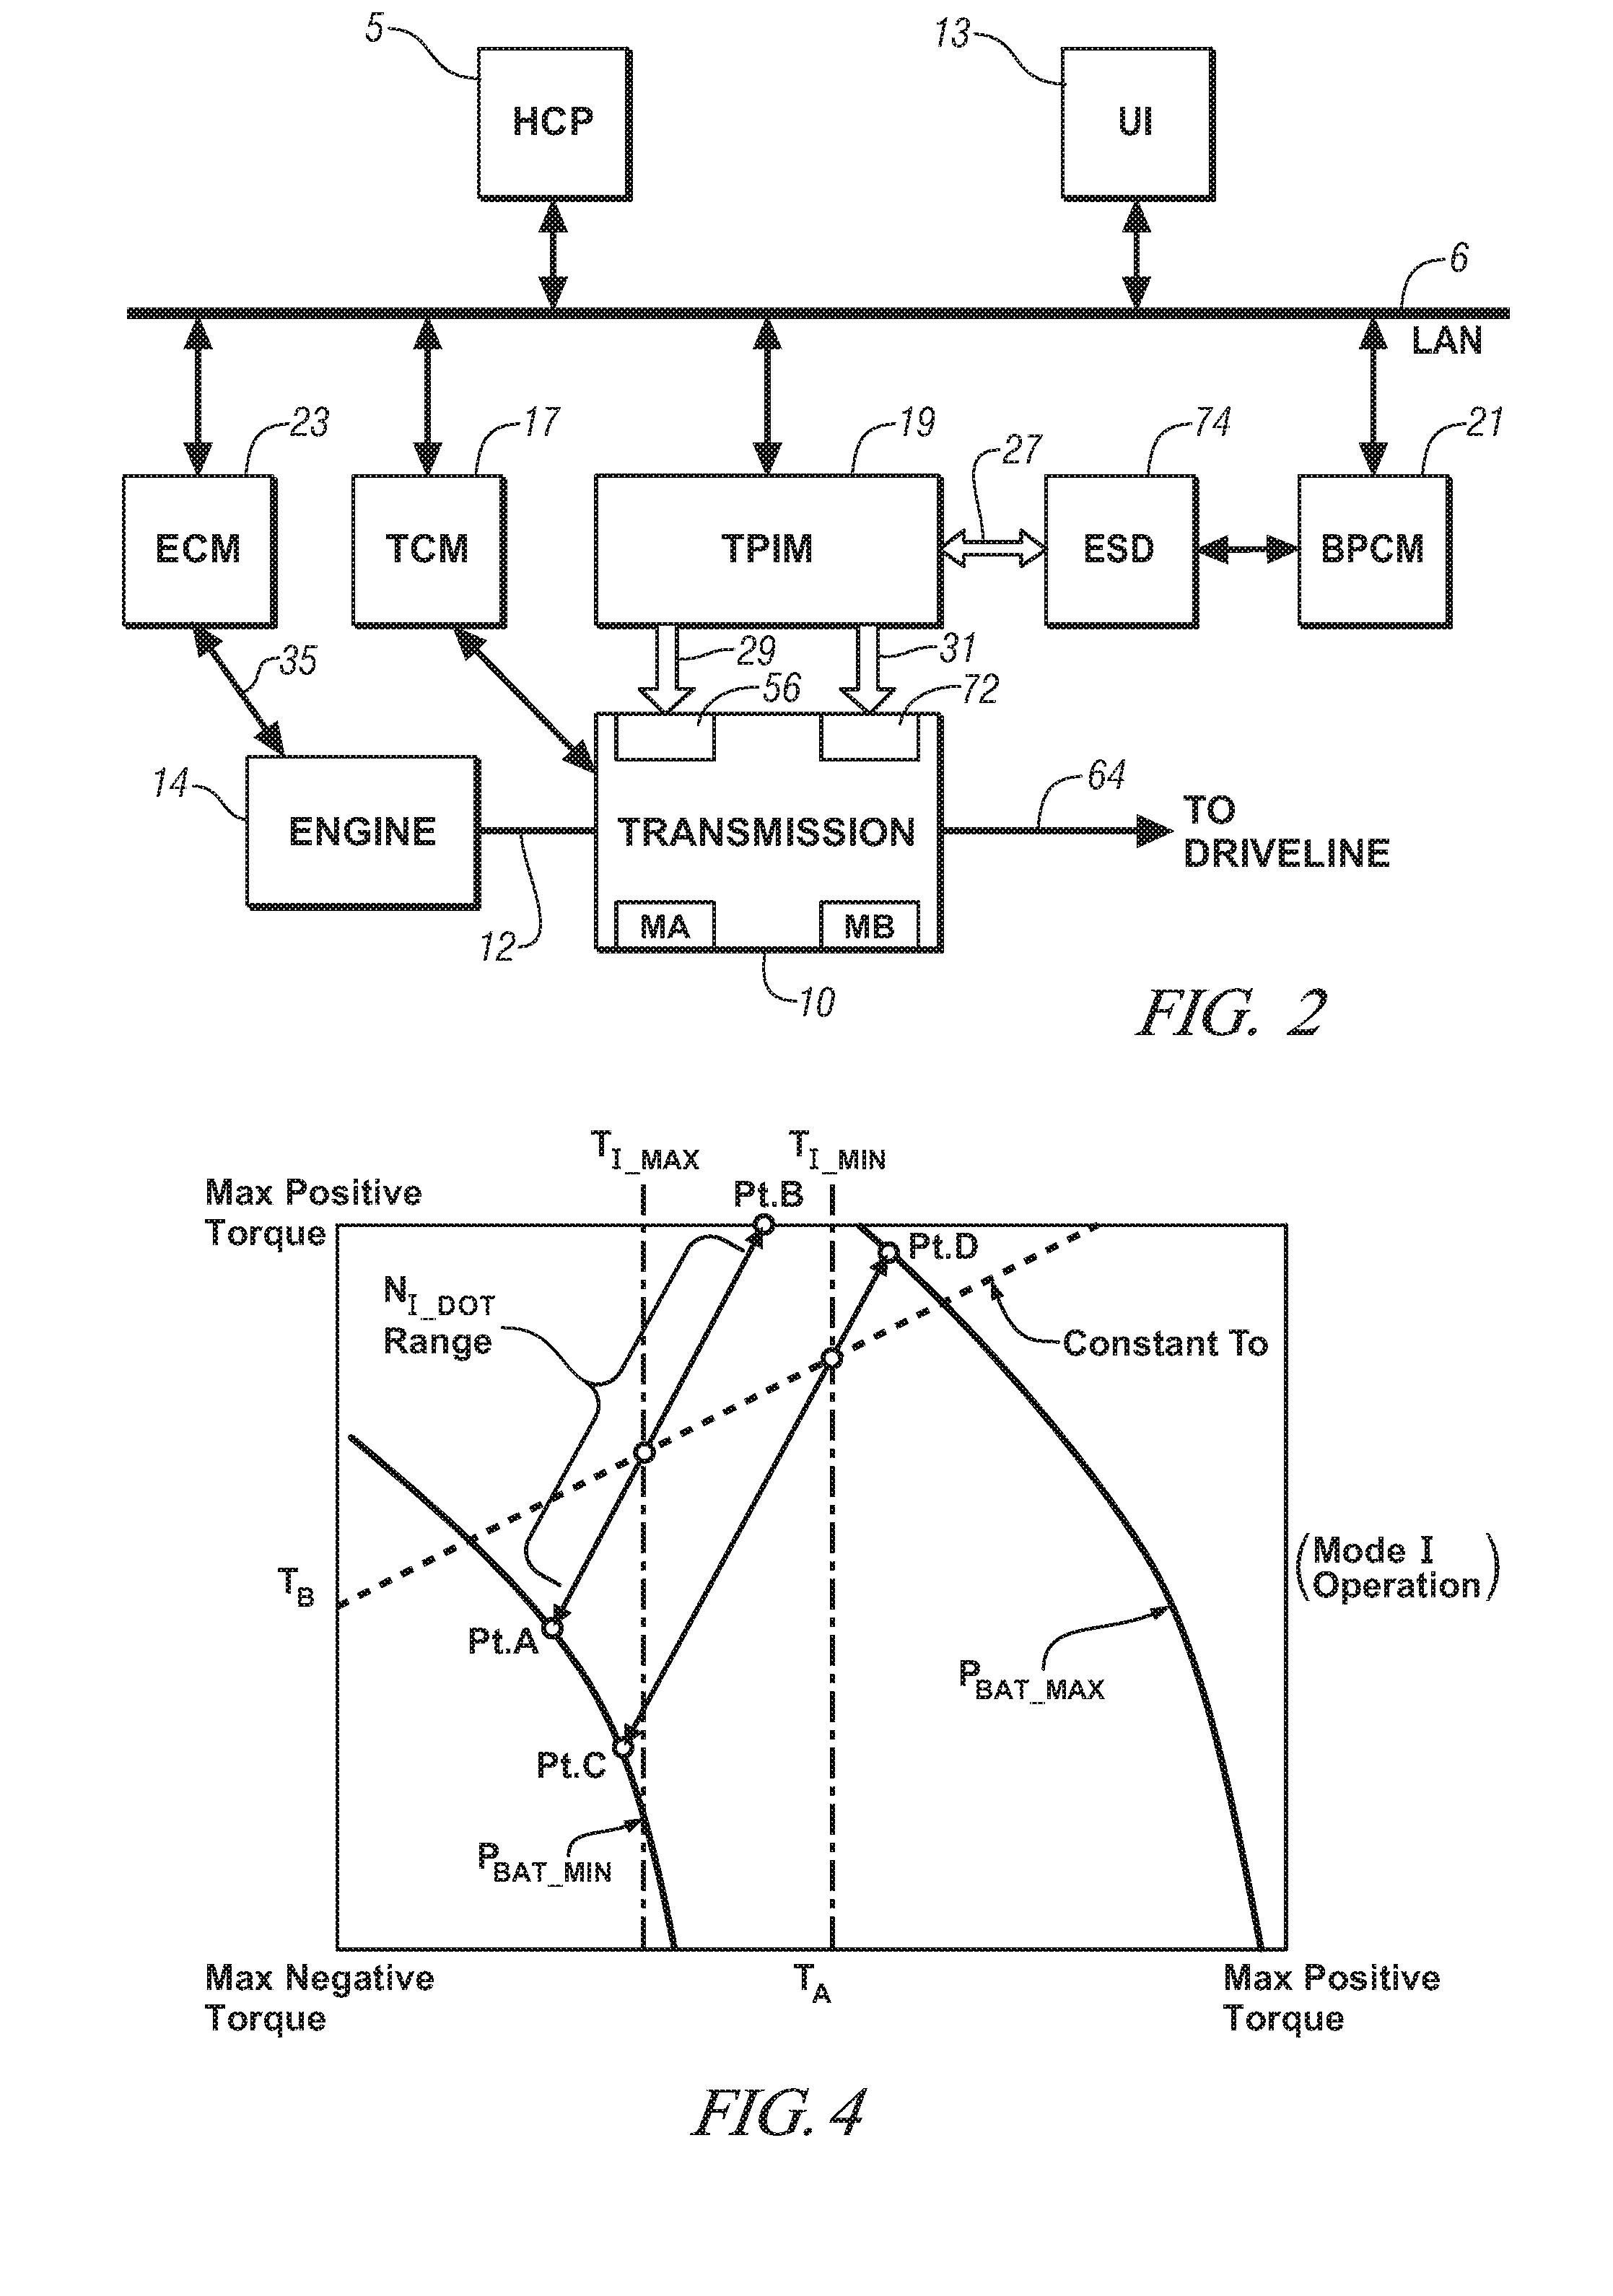 Method and apparatus to control engine restart for a hybrid powertrain system